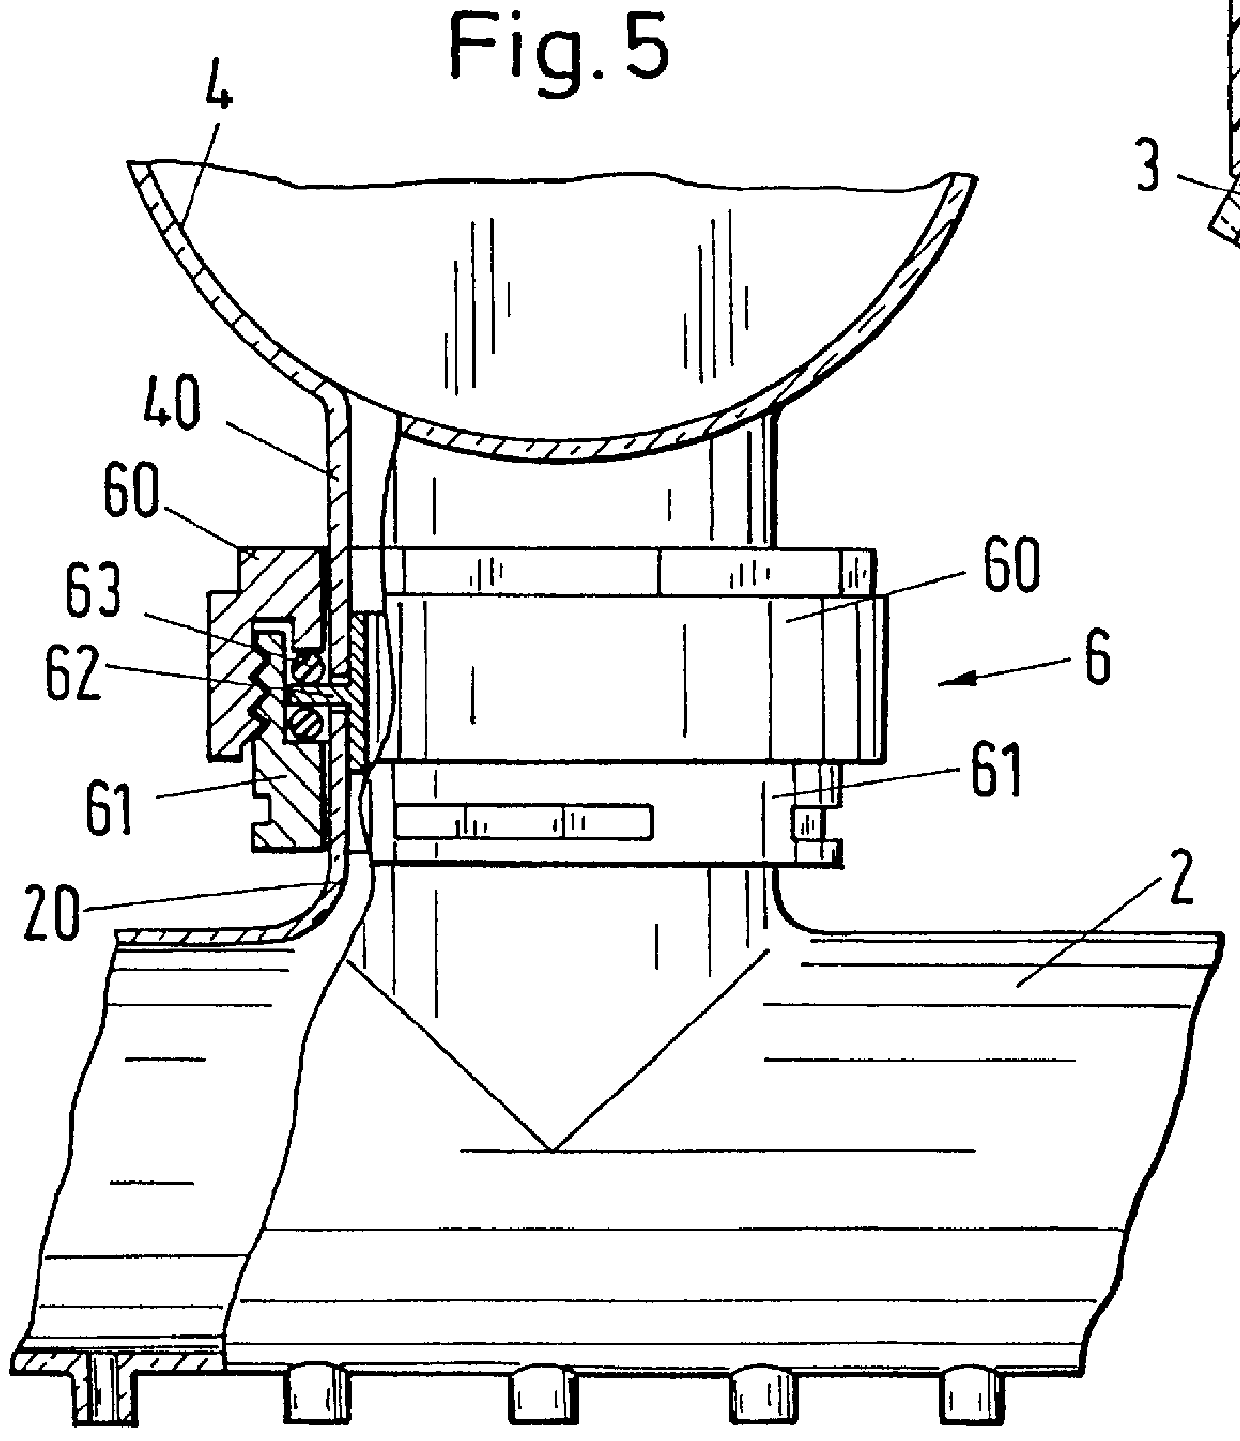 Distributor device for a column